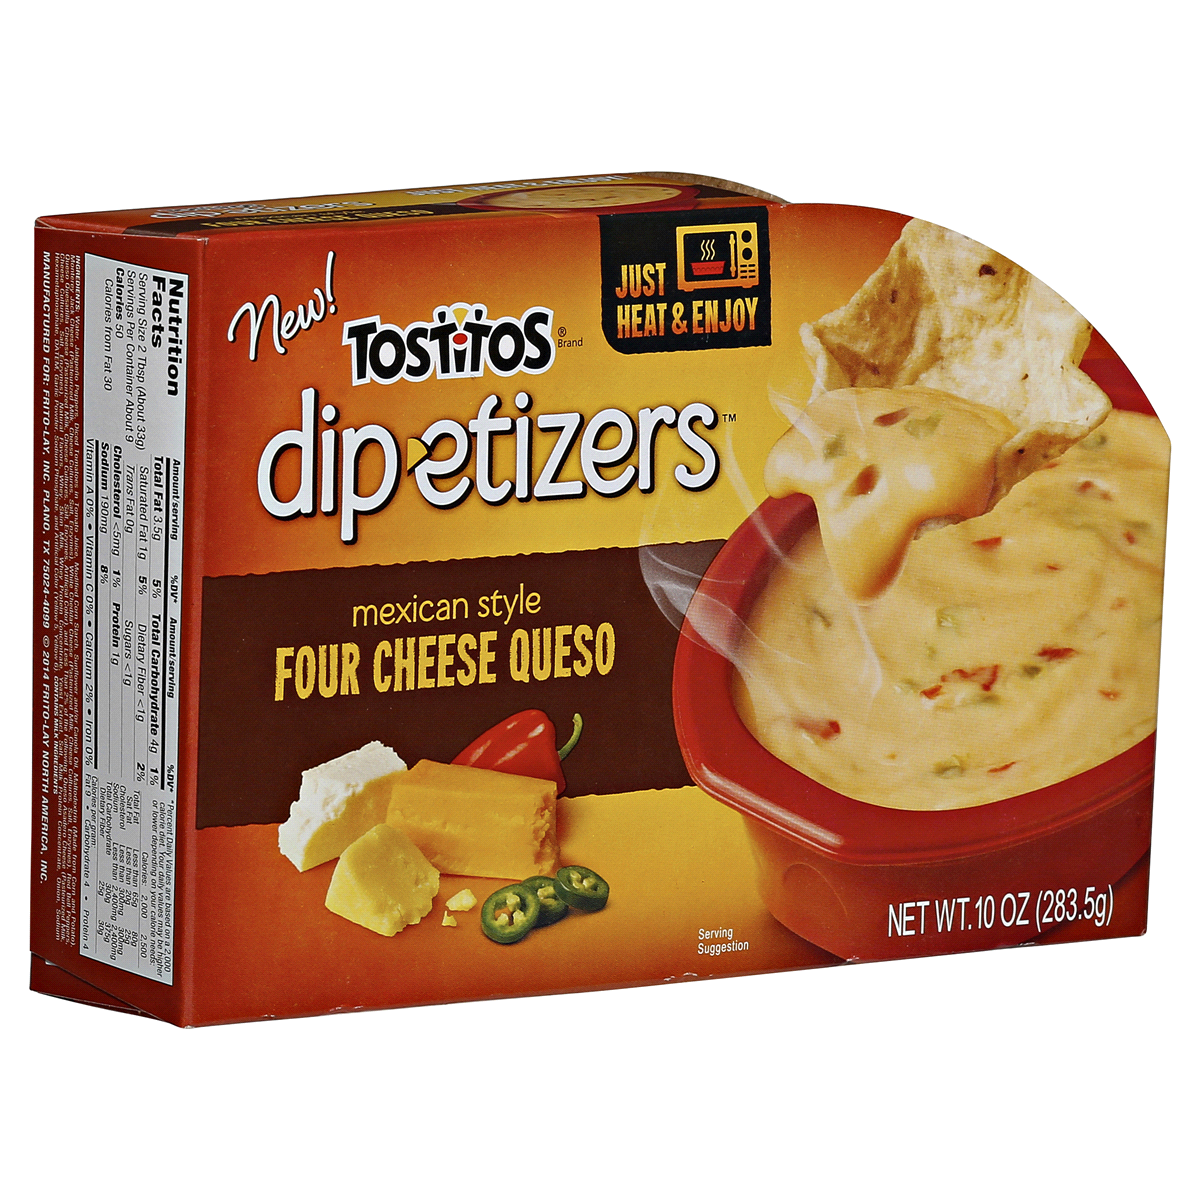 Tostitos Dip-etizers Four Cheese Queso 10 oz | Shipt Does Tostitos Queso Need To Be Refrigerated